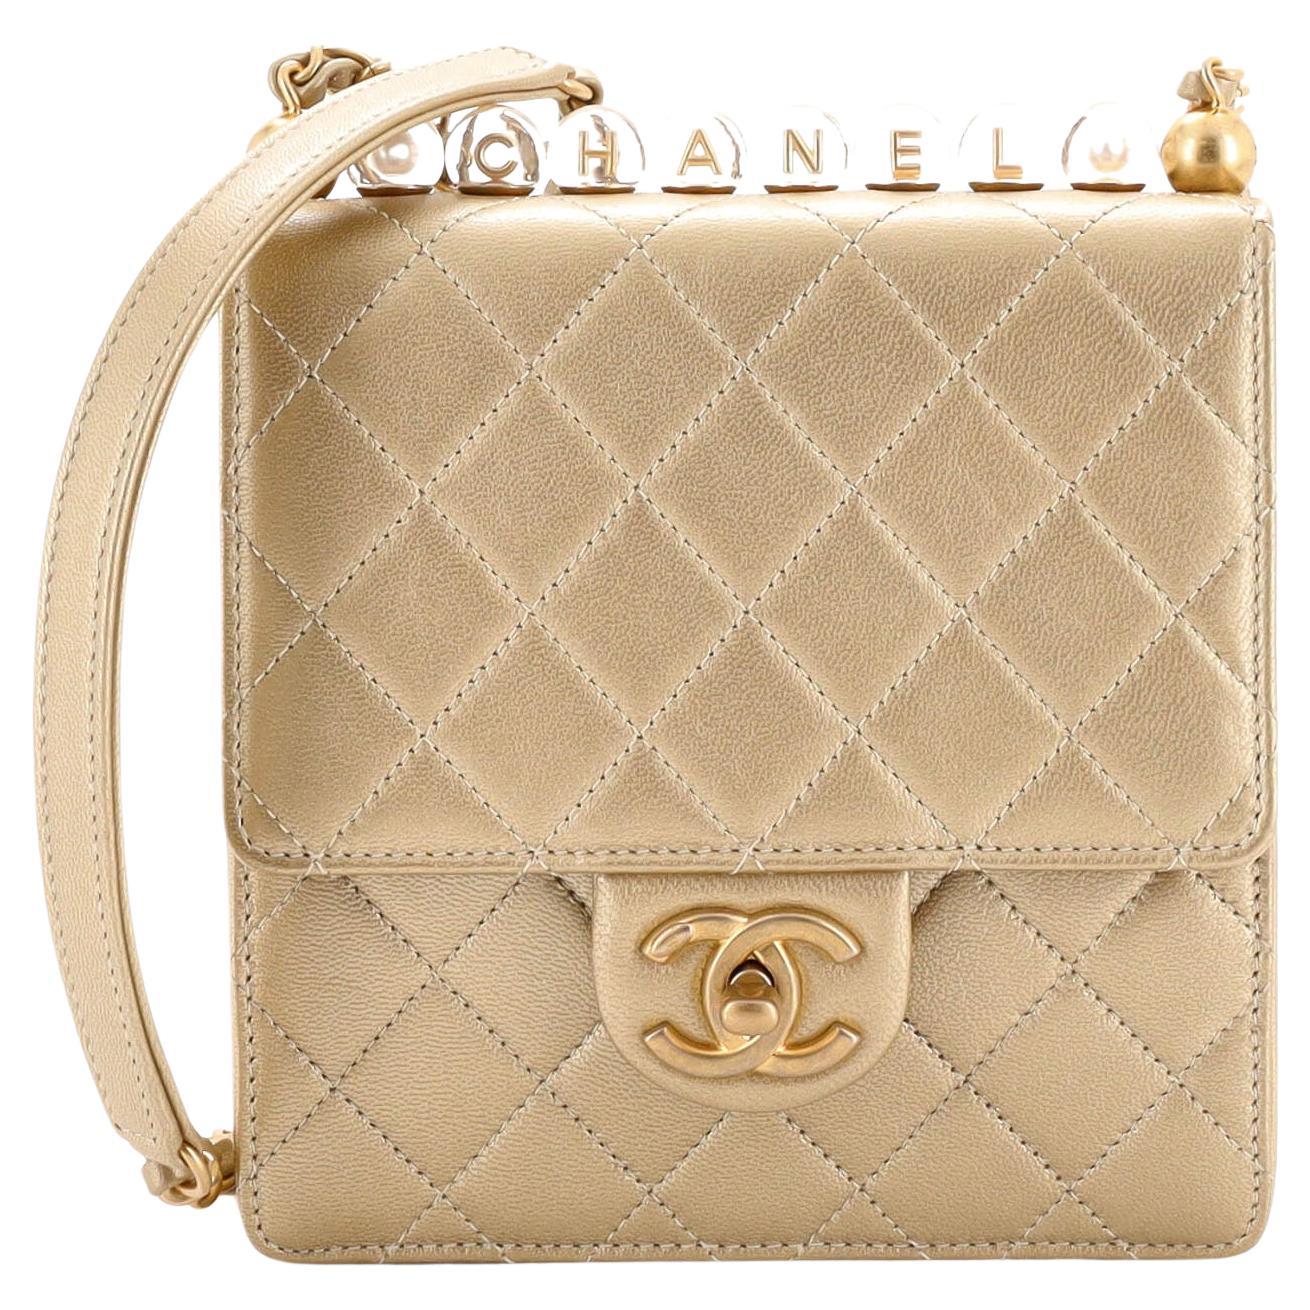 Acrylic Chanel Purse - 15 For Sale on 1stDibs